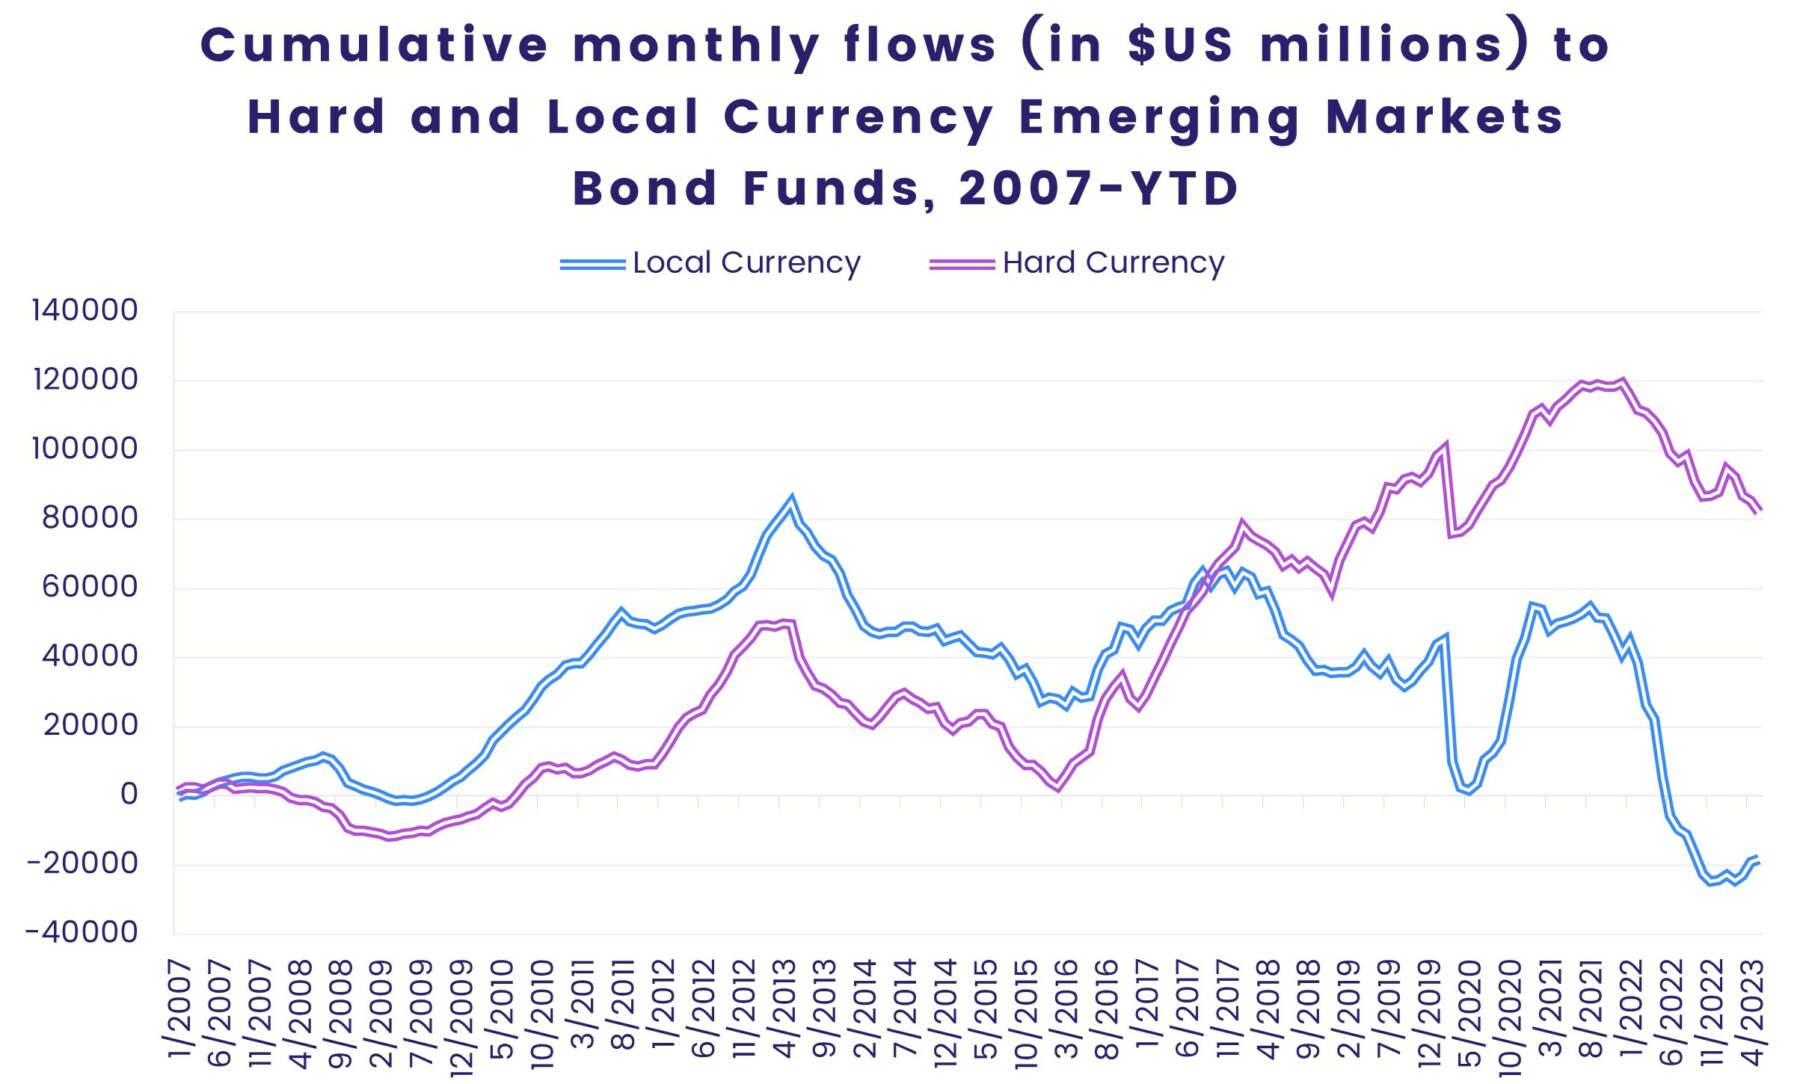 Cumulative monthly flows (in $US millions) to hard and local currency emerging markets bond funds 2007-YTD